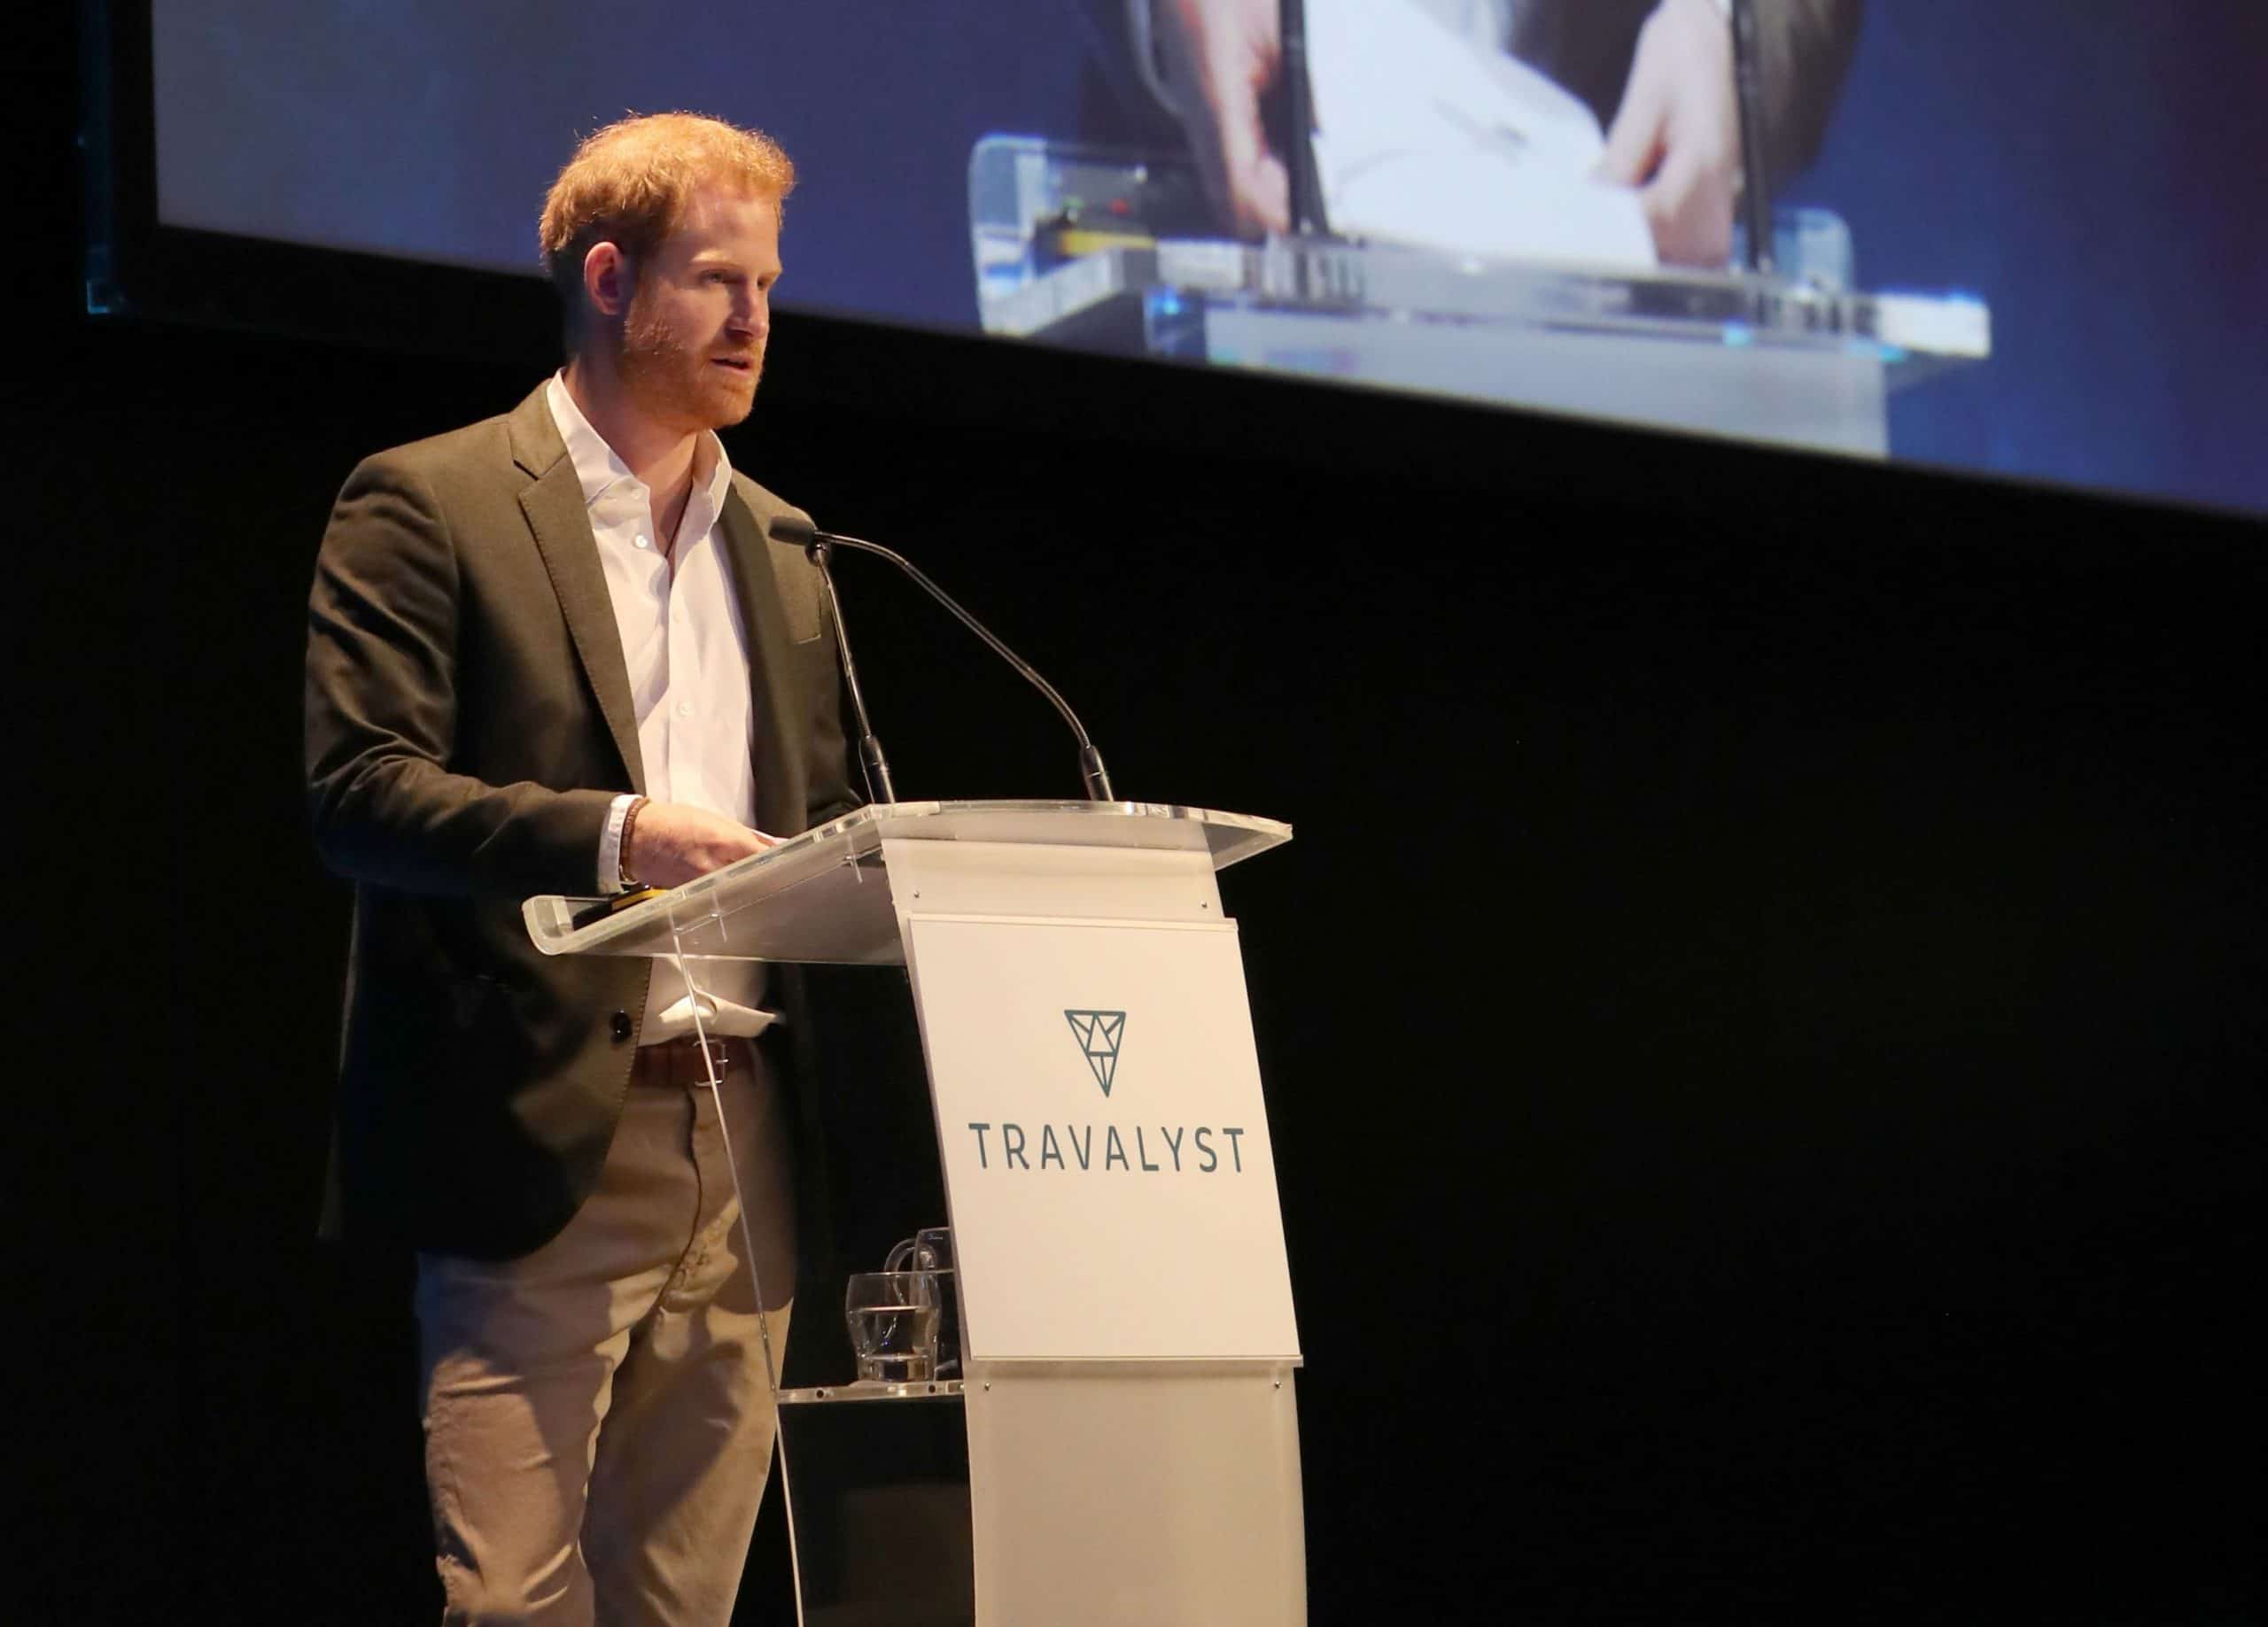 Watch – Just call me Harry, Duke of Sussex tells tourism conference host